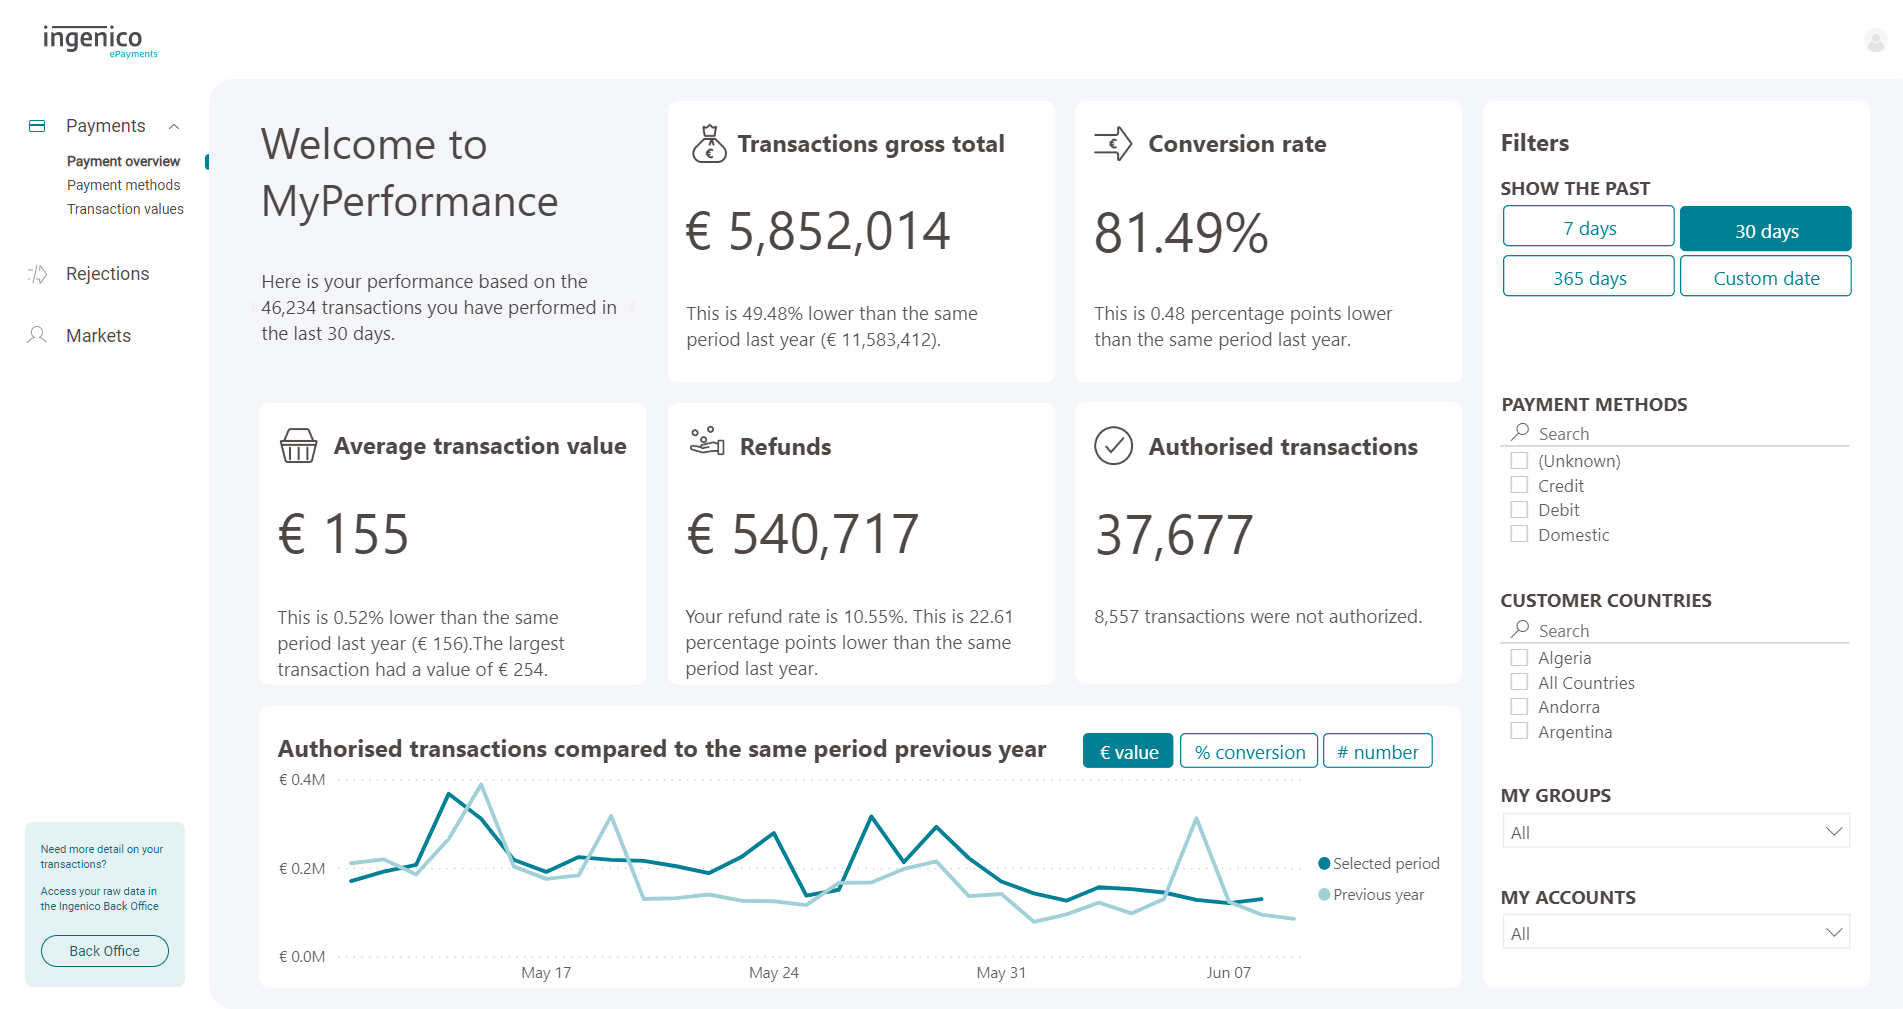 Payment overview dashboard